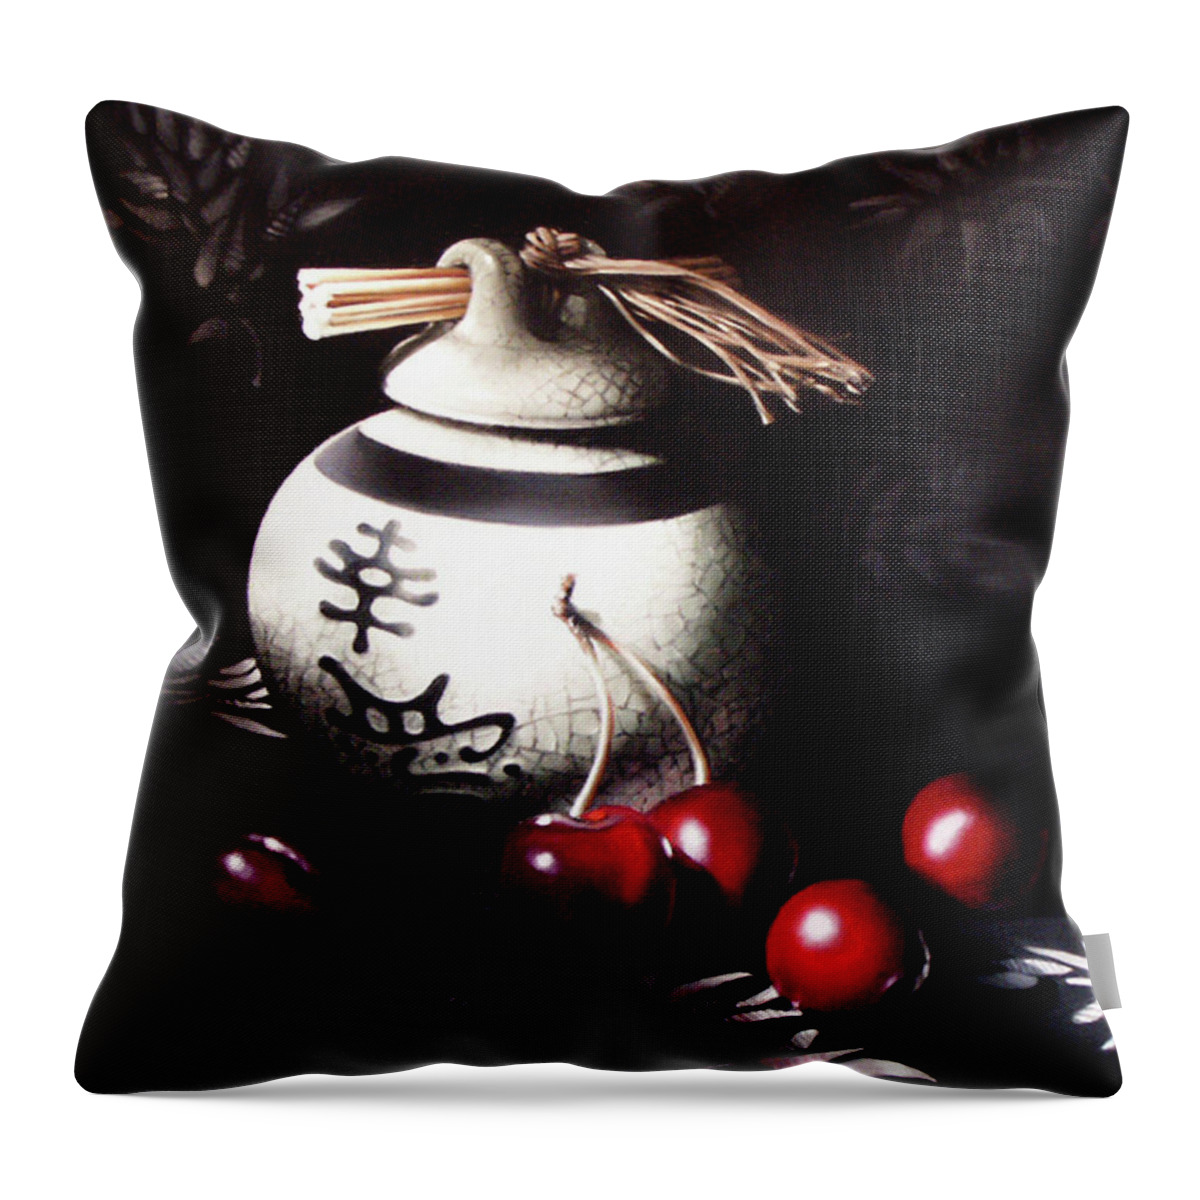 Oriental Throw Pillow featuring the pastel Ornamental Cherries by Dianna Ponting